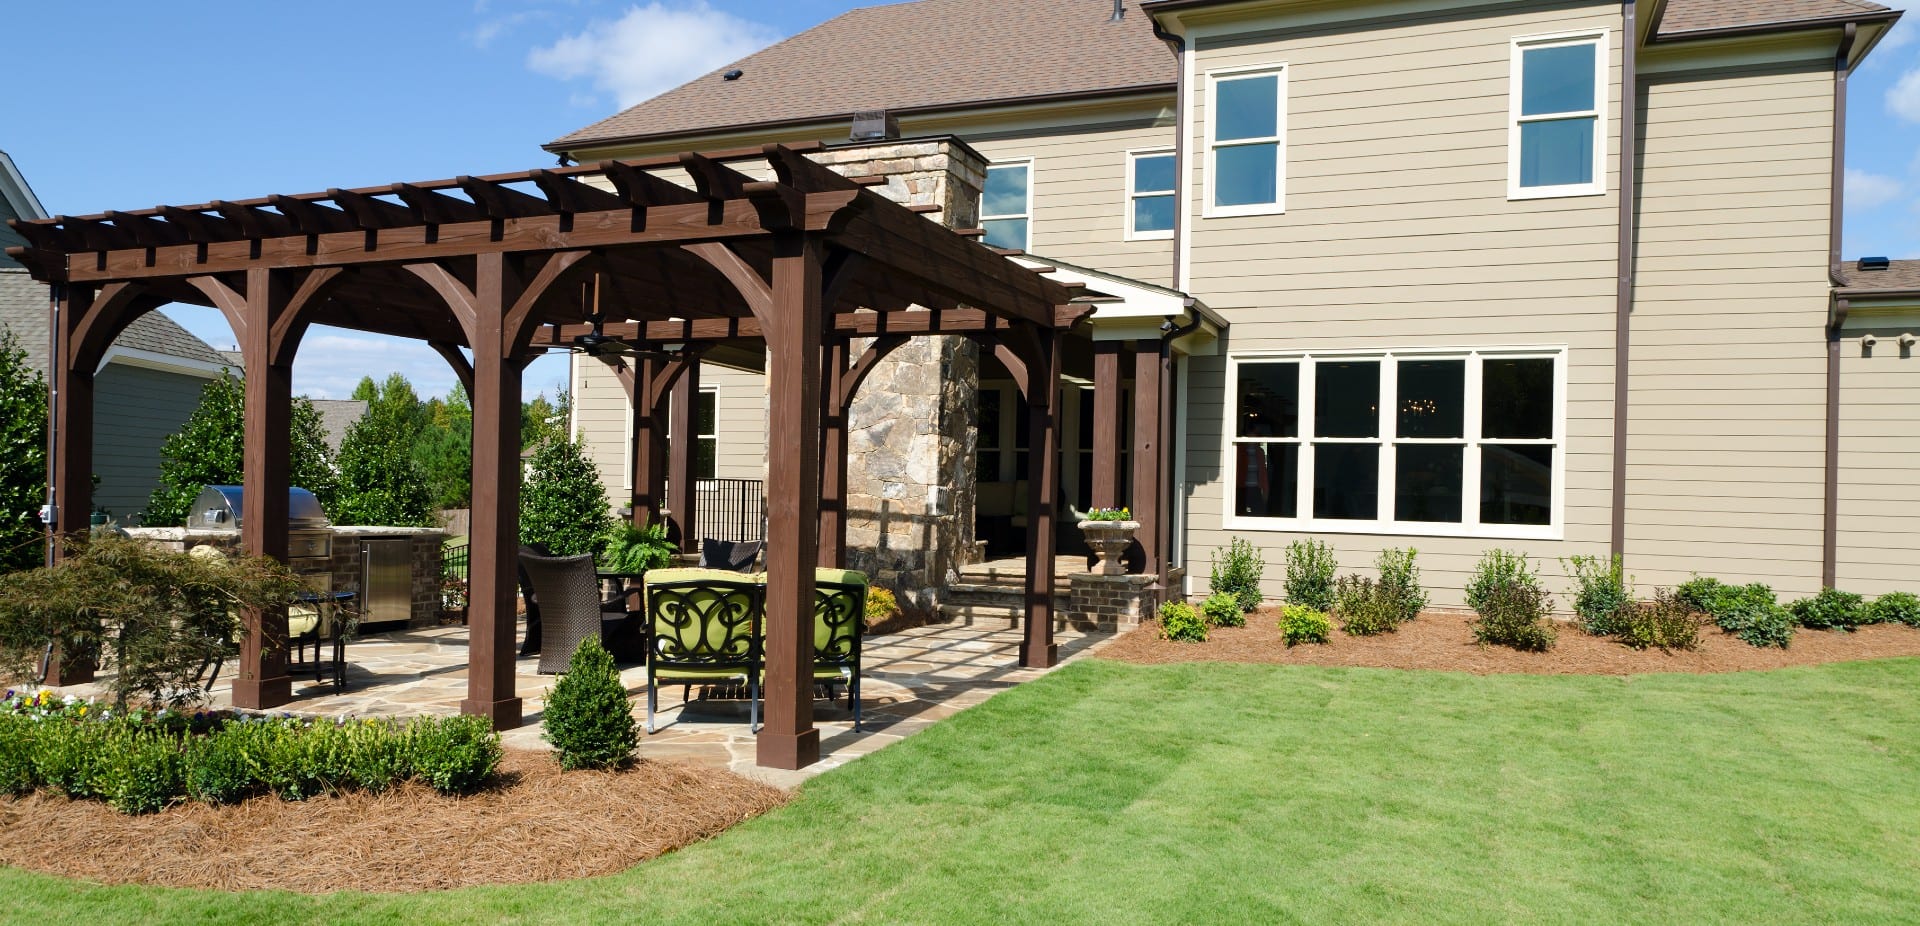 How A Pergola Can Bring Shade and Beauty to Any Yard